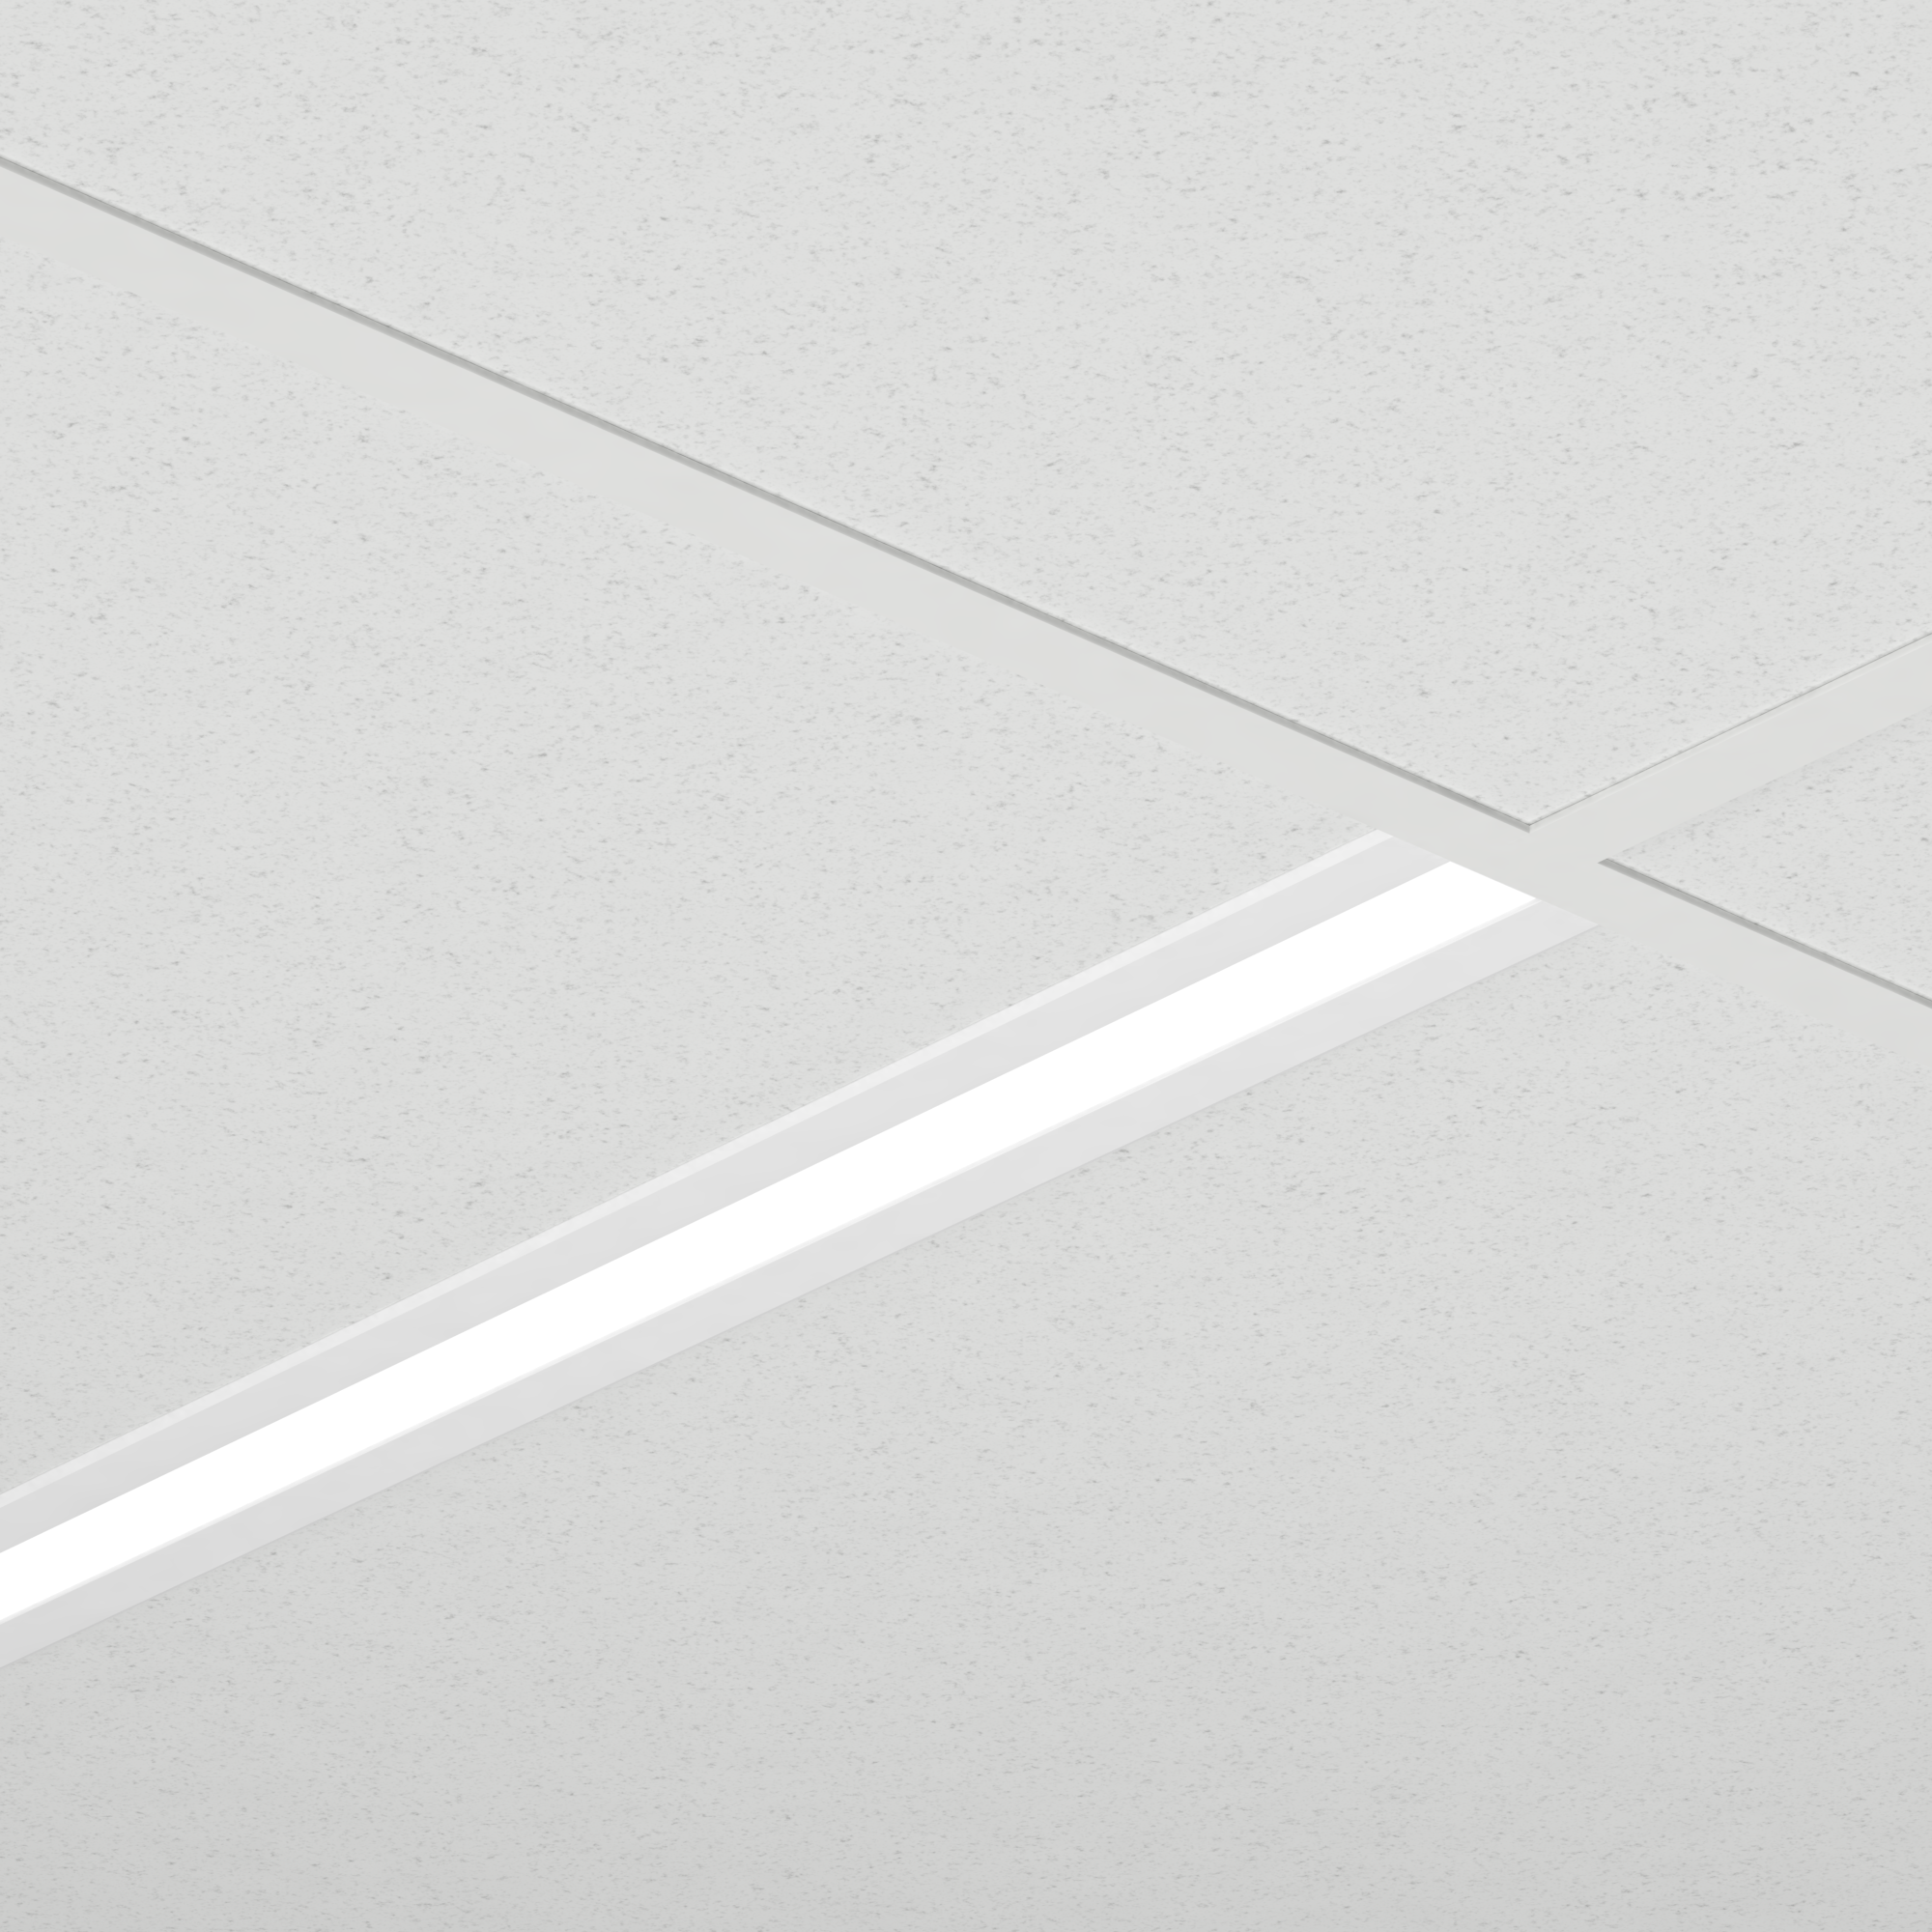 0.95” Ultra-Compact Slot LED Linear
NANOSlot TBar is a 0.95” recessed slot LED linear light fixture designed for ceiling grid systems. NANOSlot TBar brings SmartBeam® capabilities to a 15/16